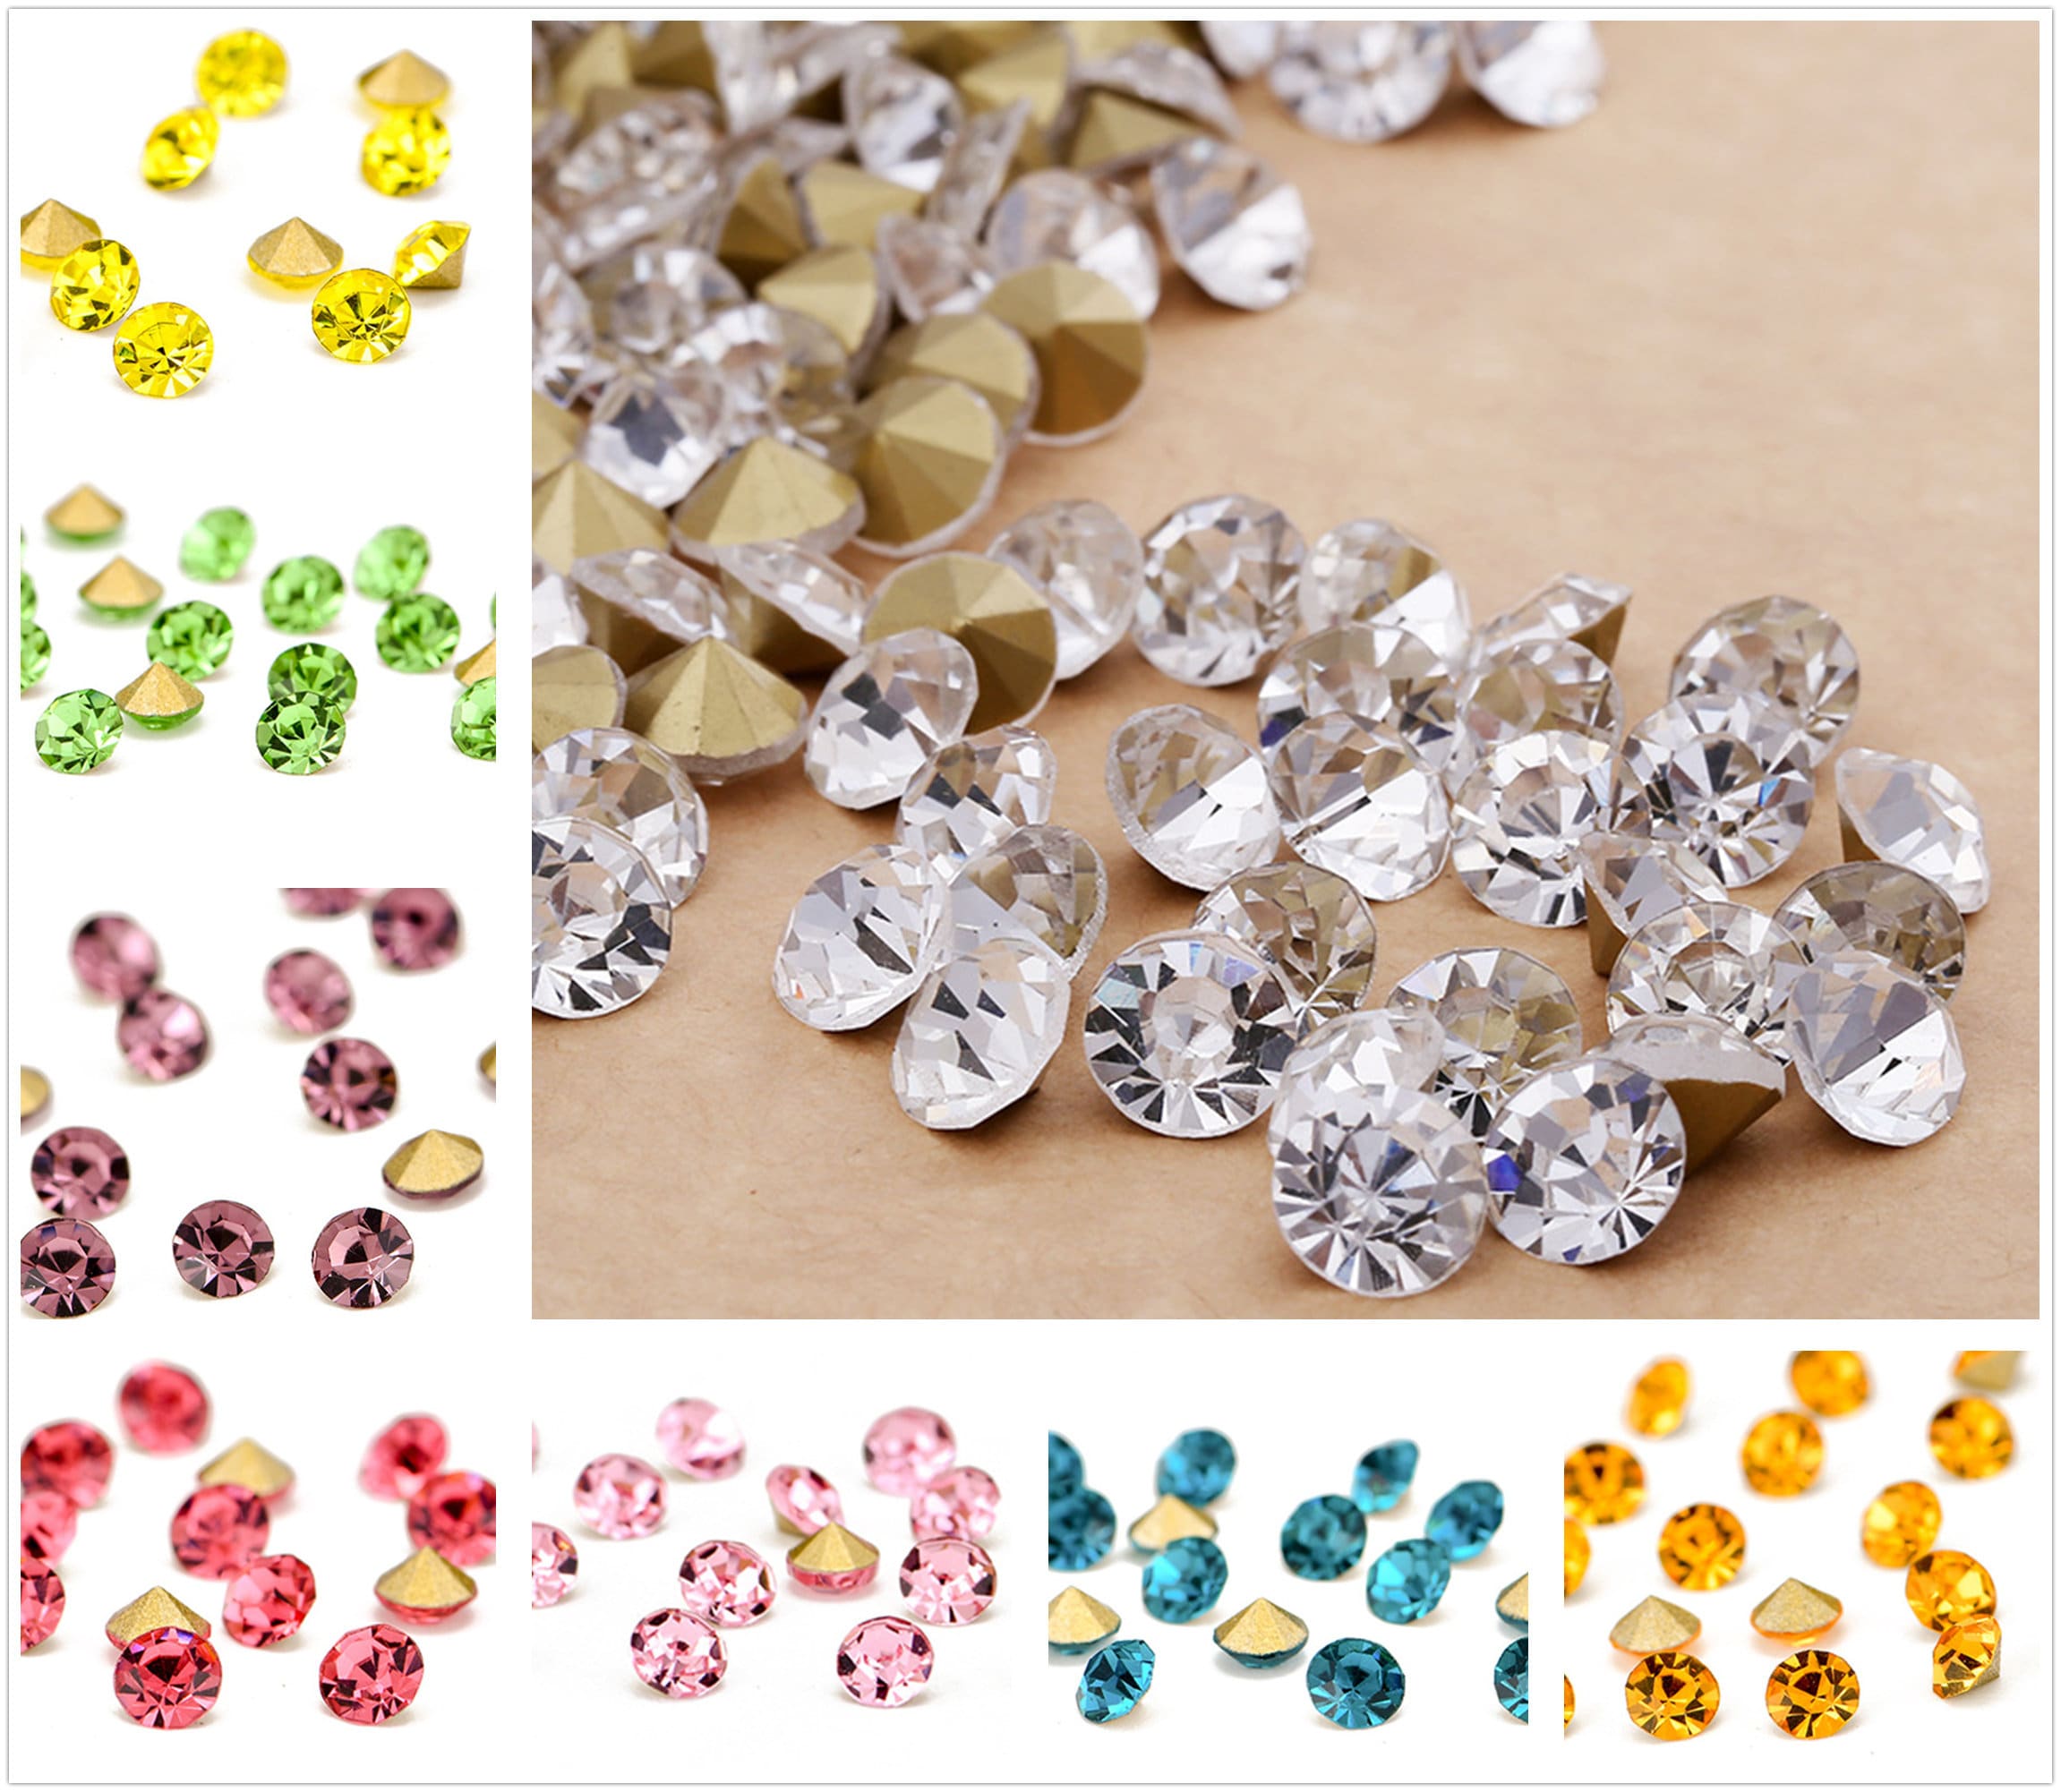 3mm clear silver rhinestones,home decoration colorful loose rhinestones  point back stones nail art crystals color mix ss12 - AliExpress